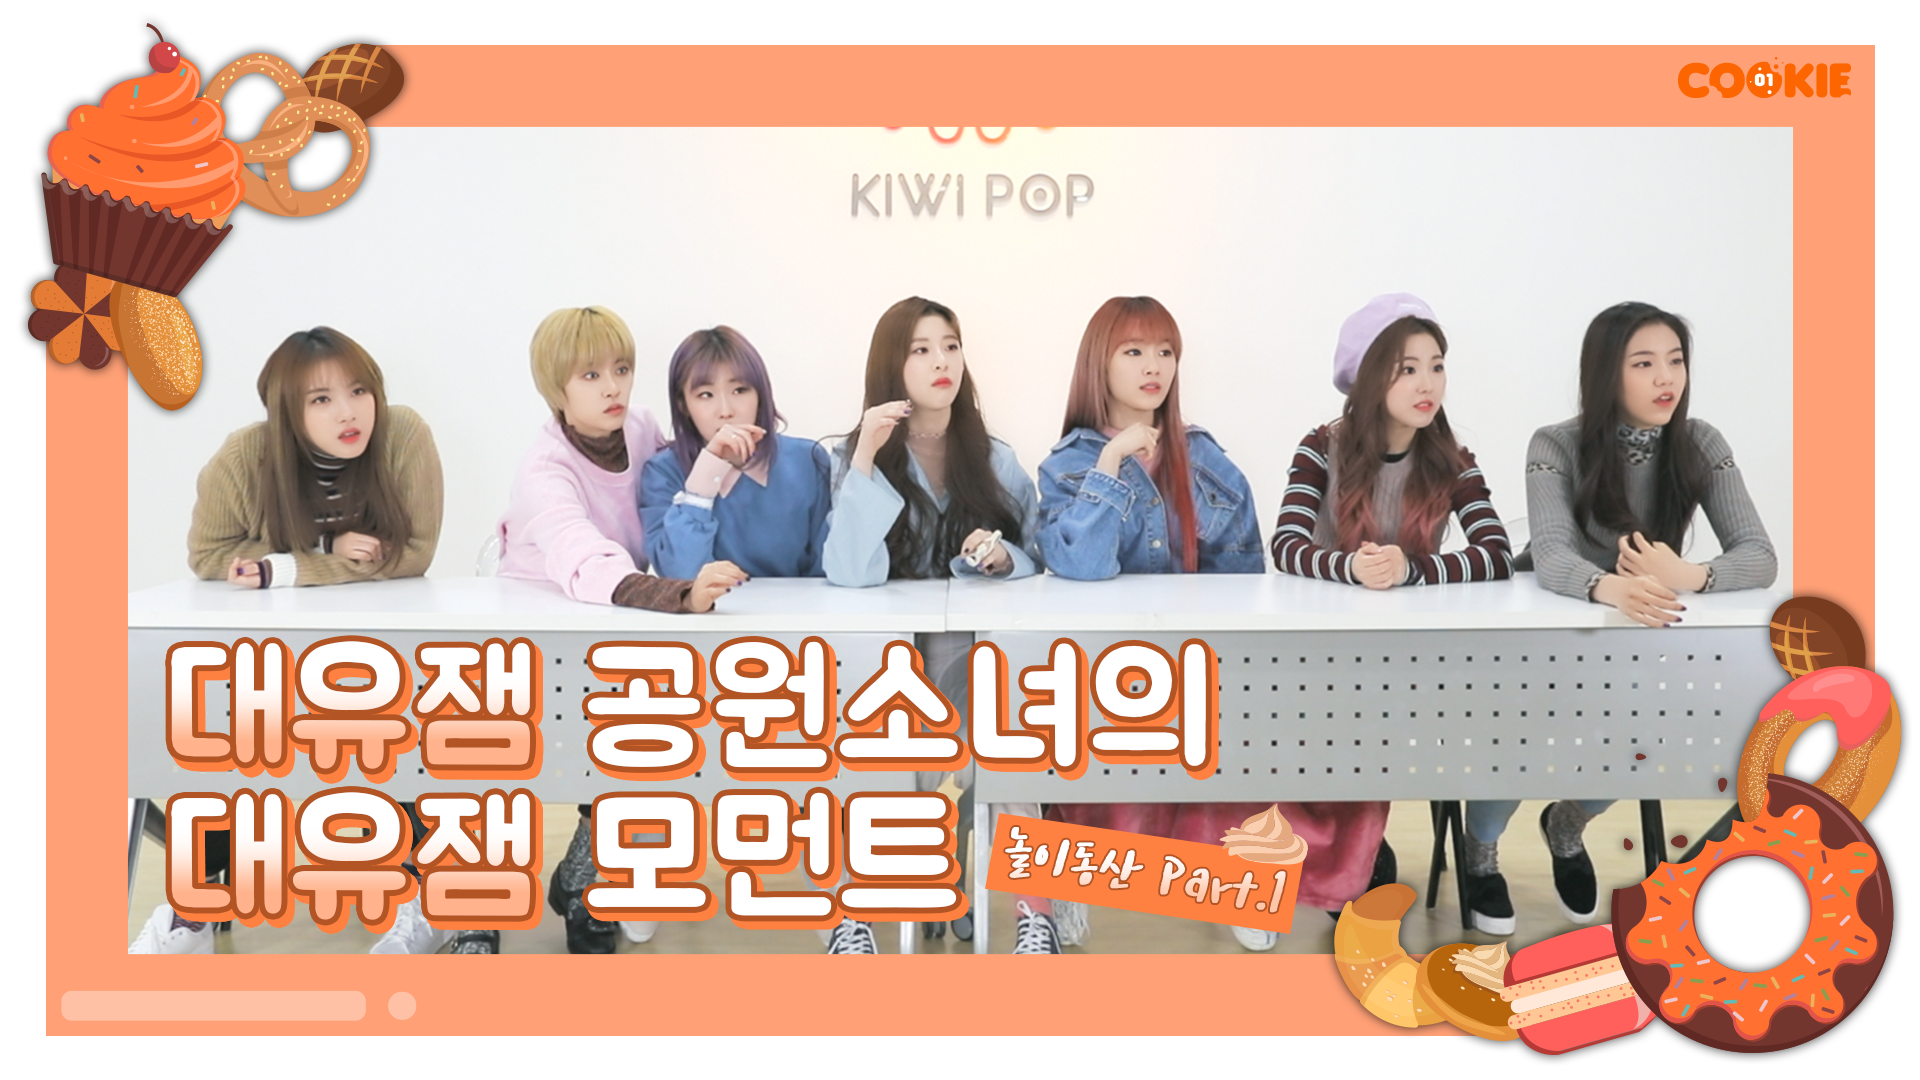 [GWSN 01COOKIE] Super funny GWSN's super funny Moment (Amusement Park Part.1)